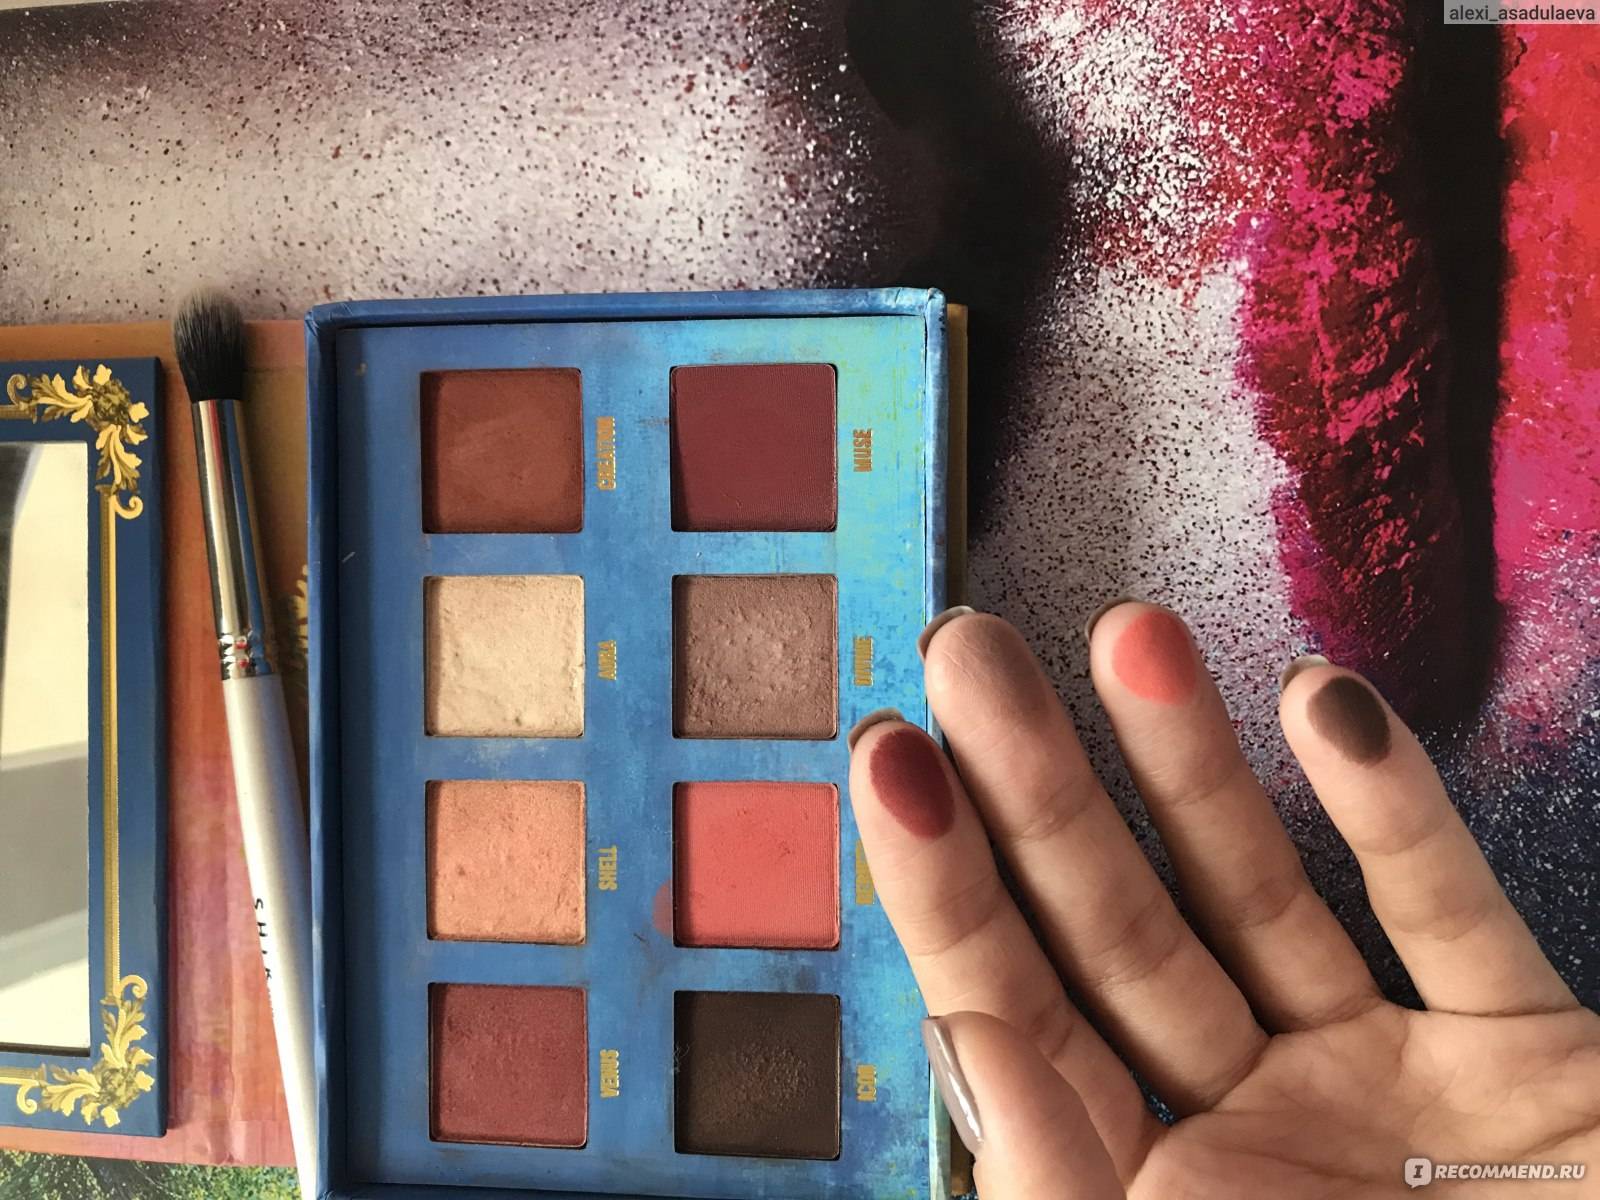 21 eyeshadow palette dupes for, you, the thrifty makeup lover